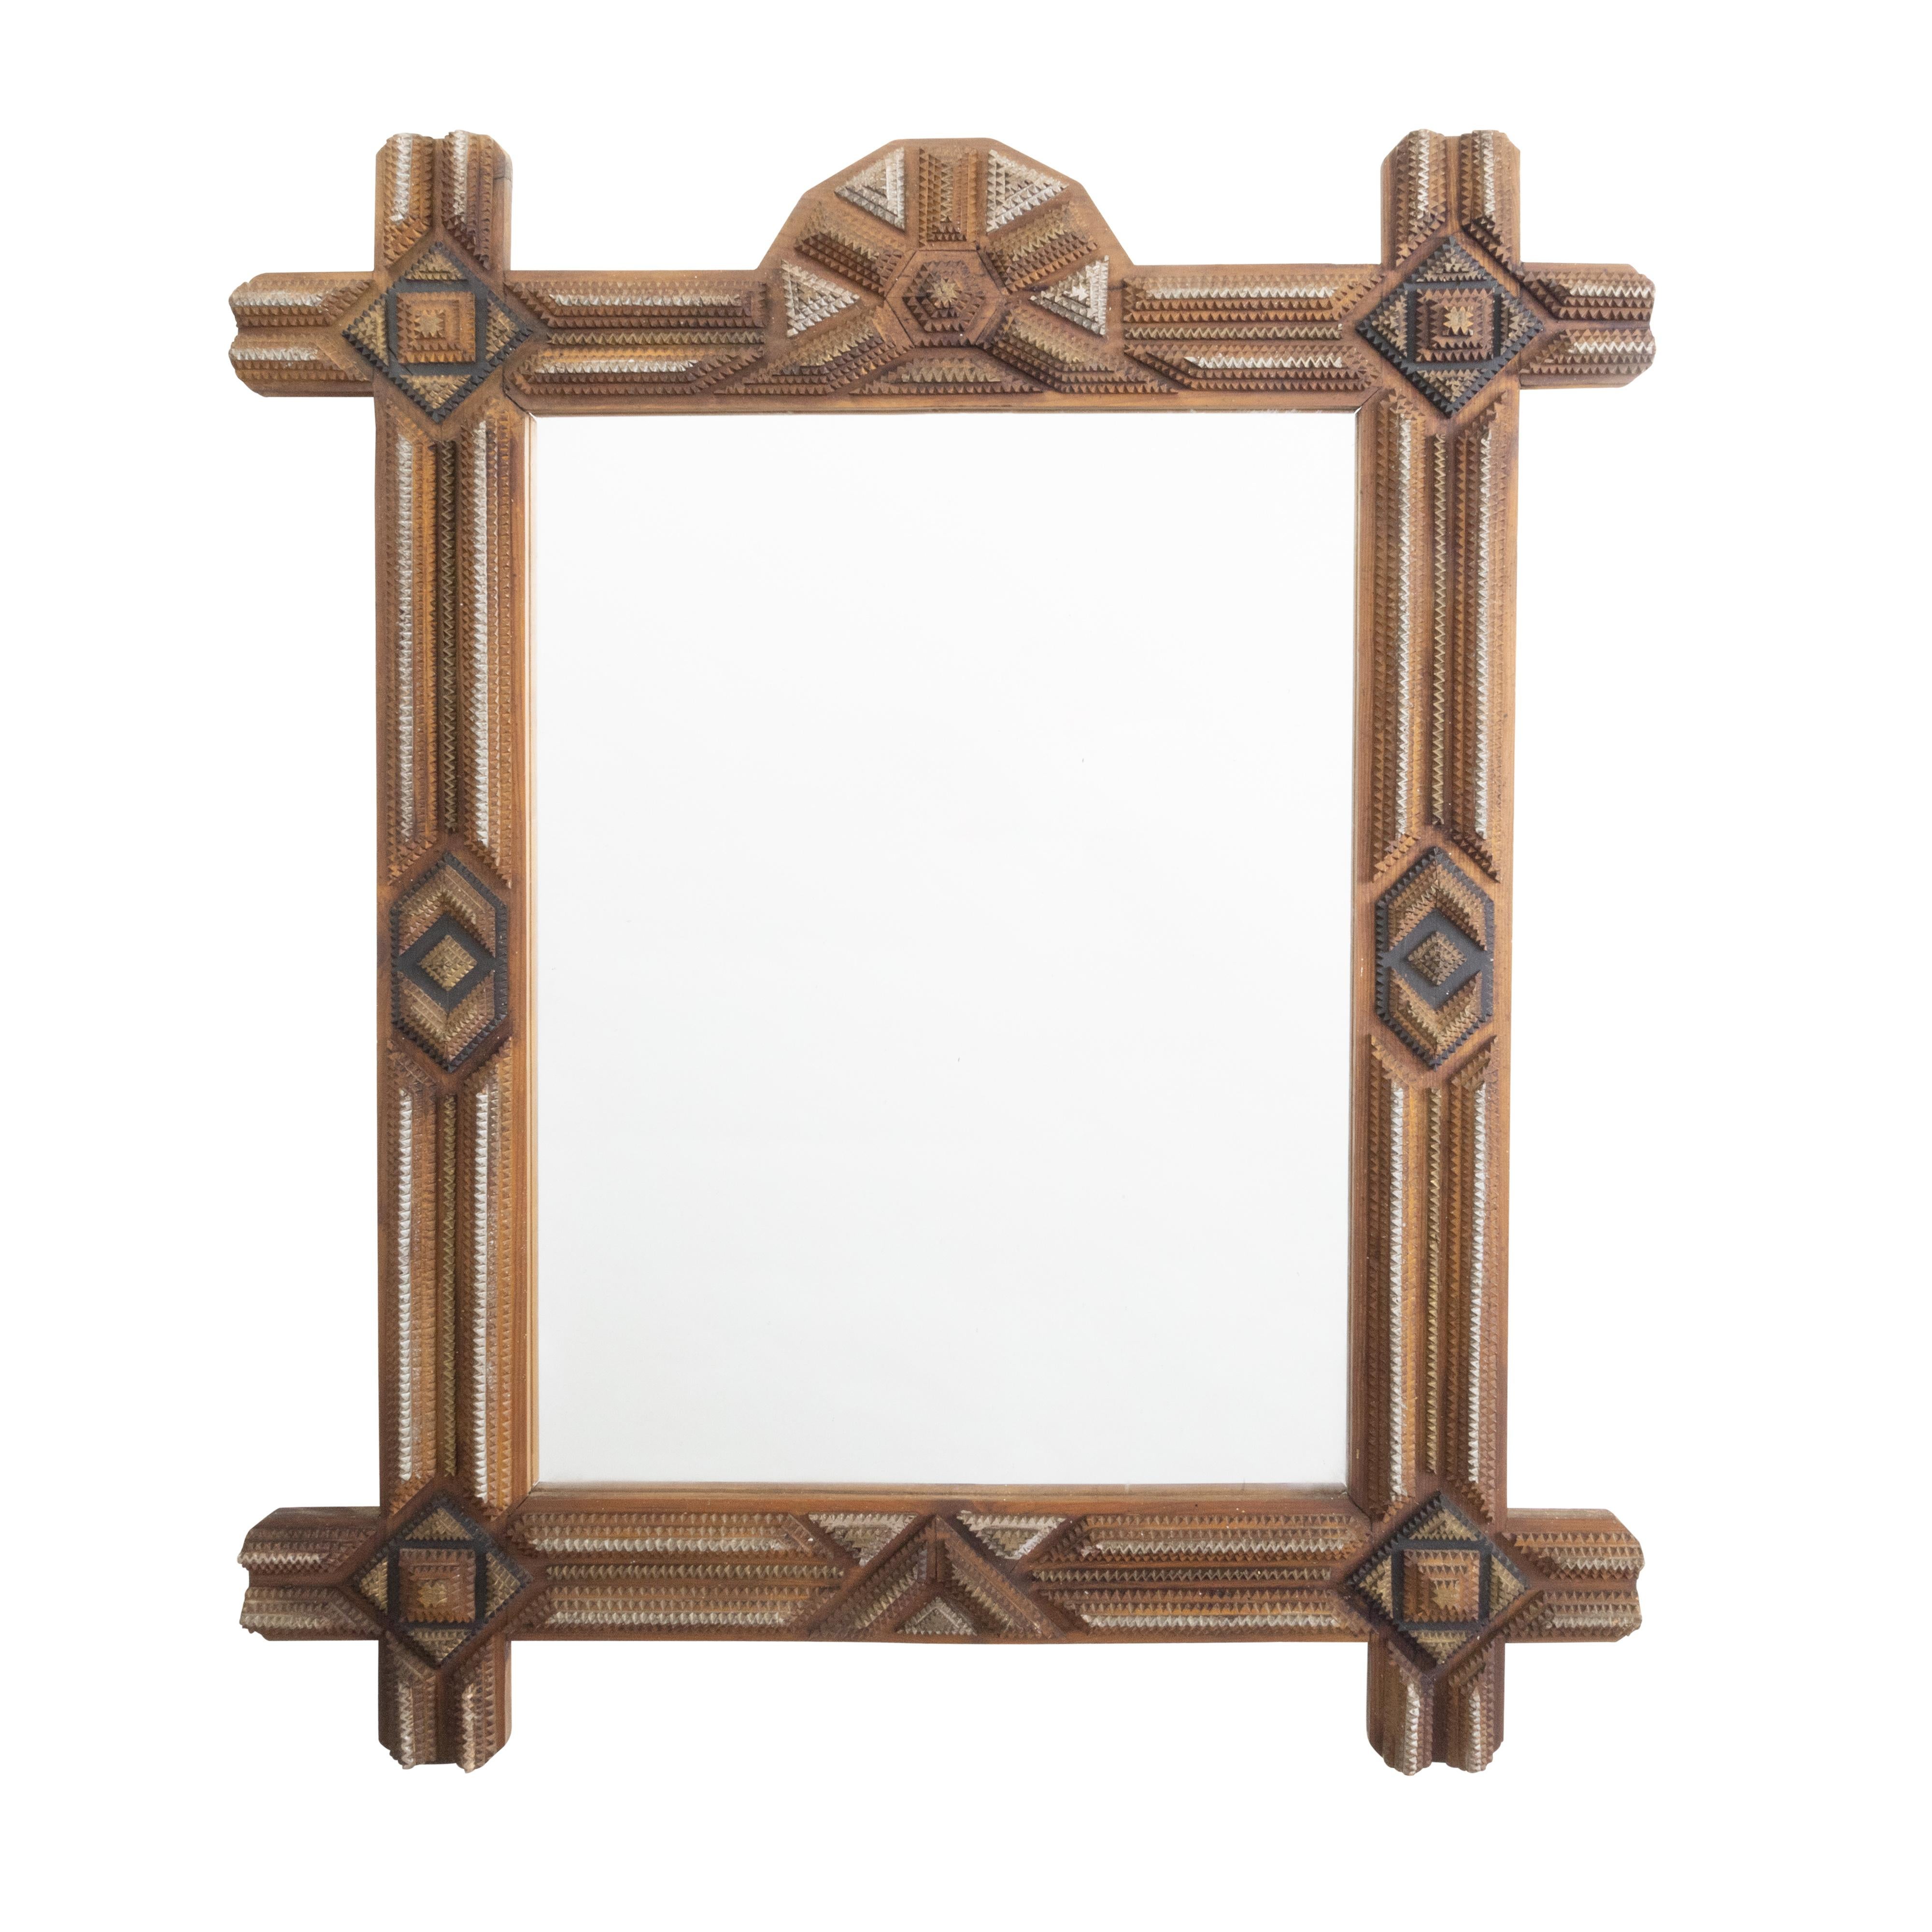 A French Tramp Art hand-carved mirror from the early 20th century with geometric motifs and painted accents. Created in France during the turn of the century, this mirror was hand carved in the manner typical of the Tramp Art style. Consisting of a